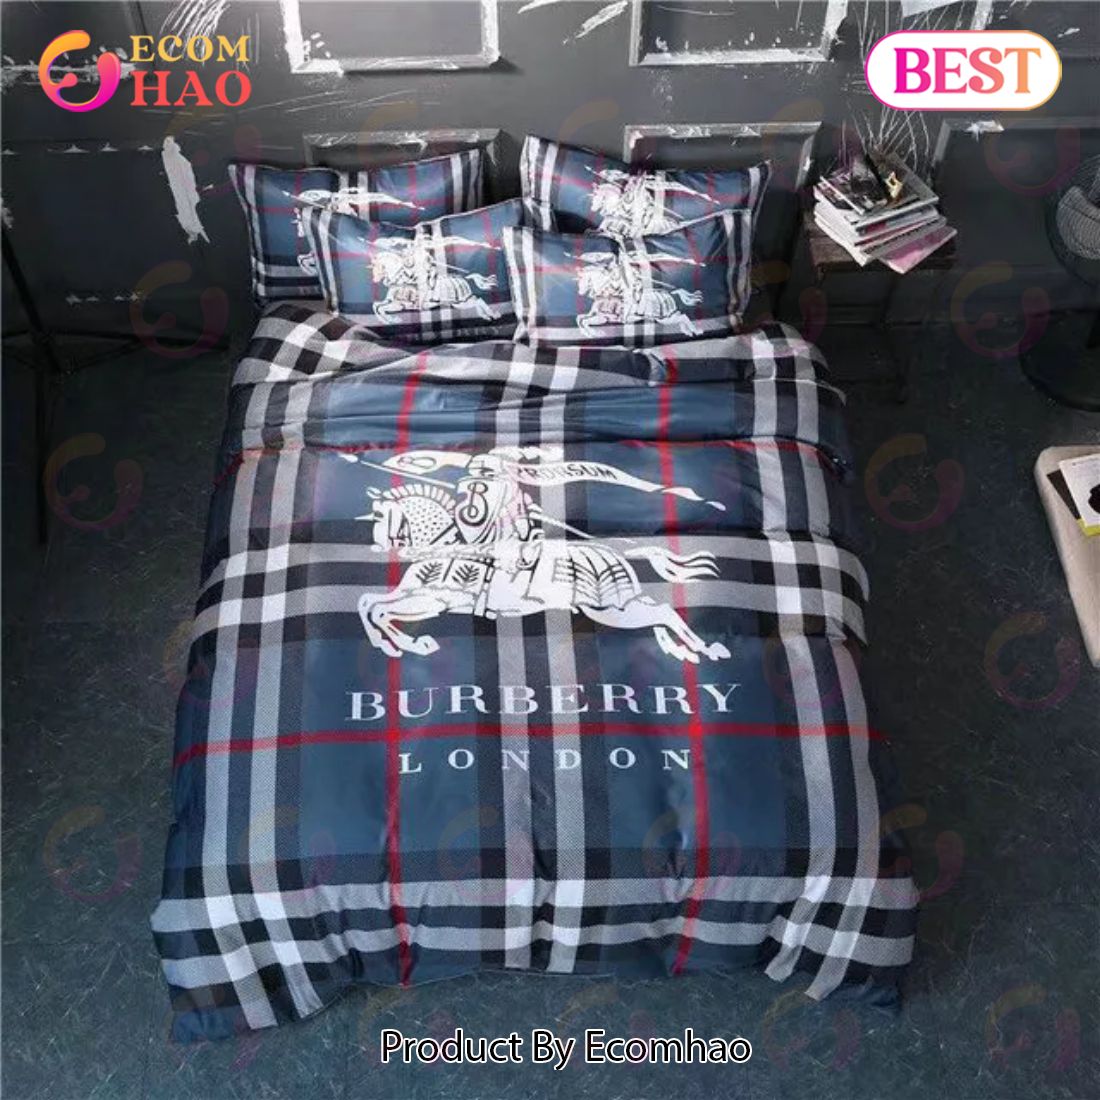 Burberry New Bedding Luxury Bedding Sets Quilt Sets Duvet Cover Luxury Brand Bedroom Sets Bedding Best Luxury Bed Sets Gift Thankgivings And Christmas